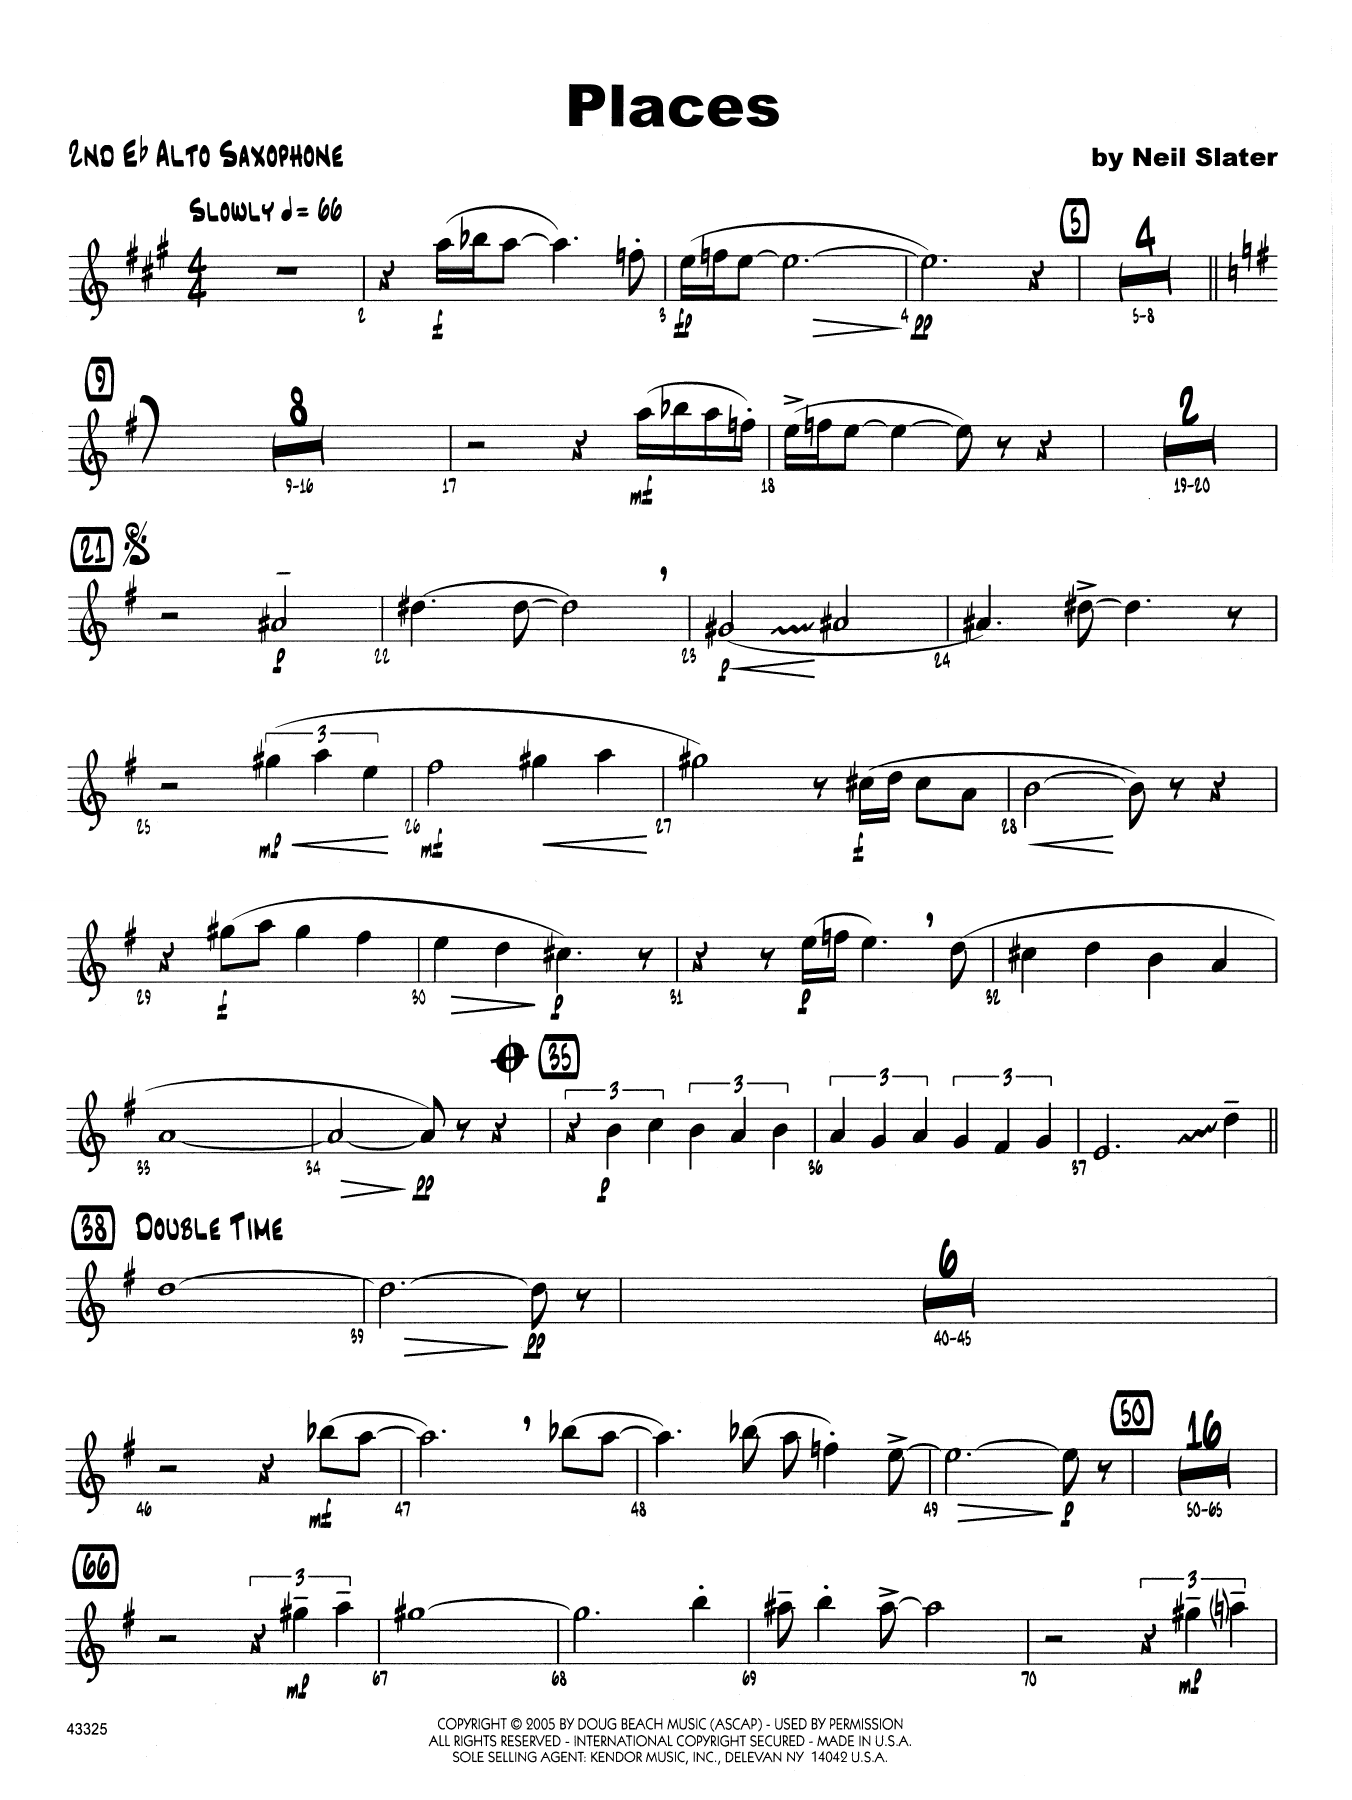 Download Neil Slater Places - Opt. Bass Clarinet Sheet Music